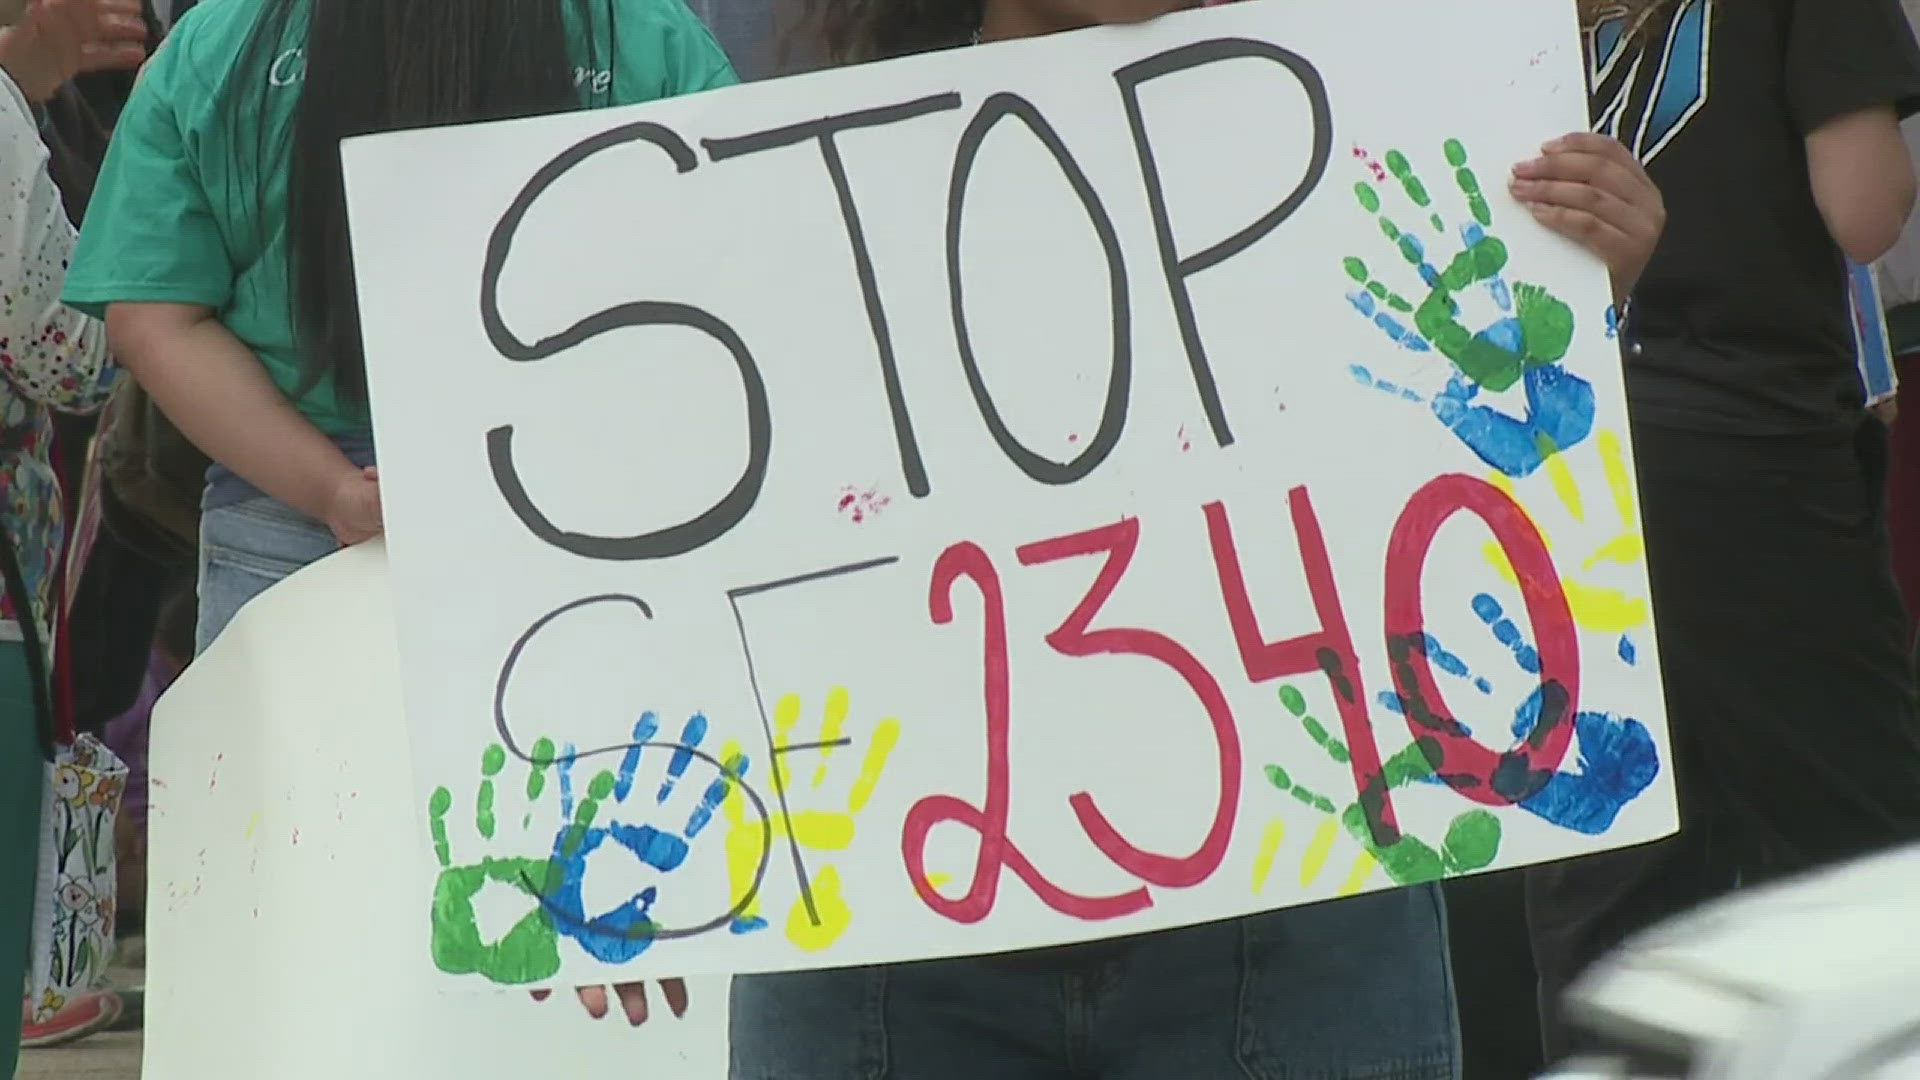 Demonstrations were held in Des Moines, Davenport and more.